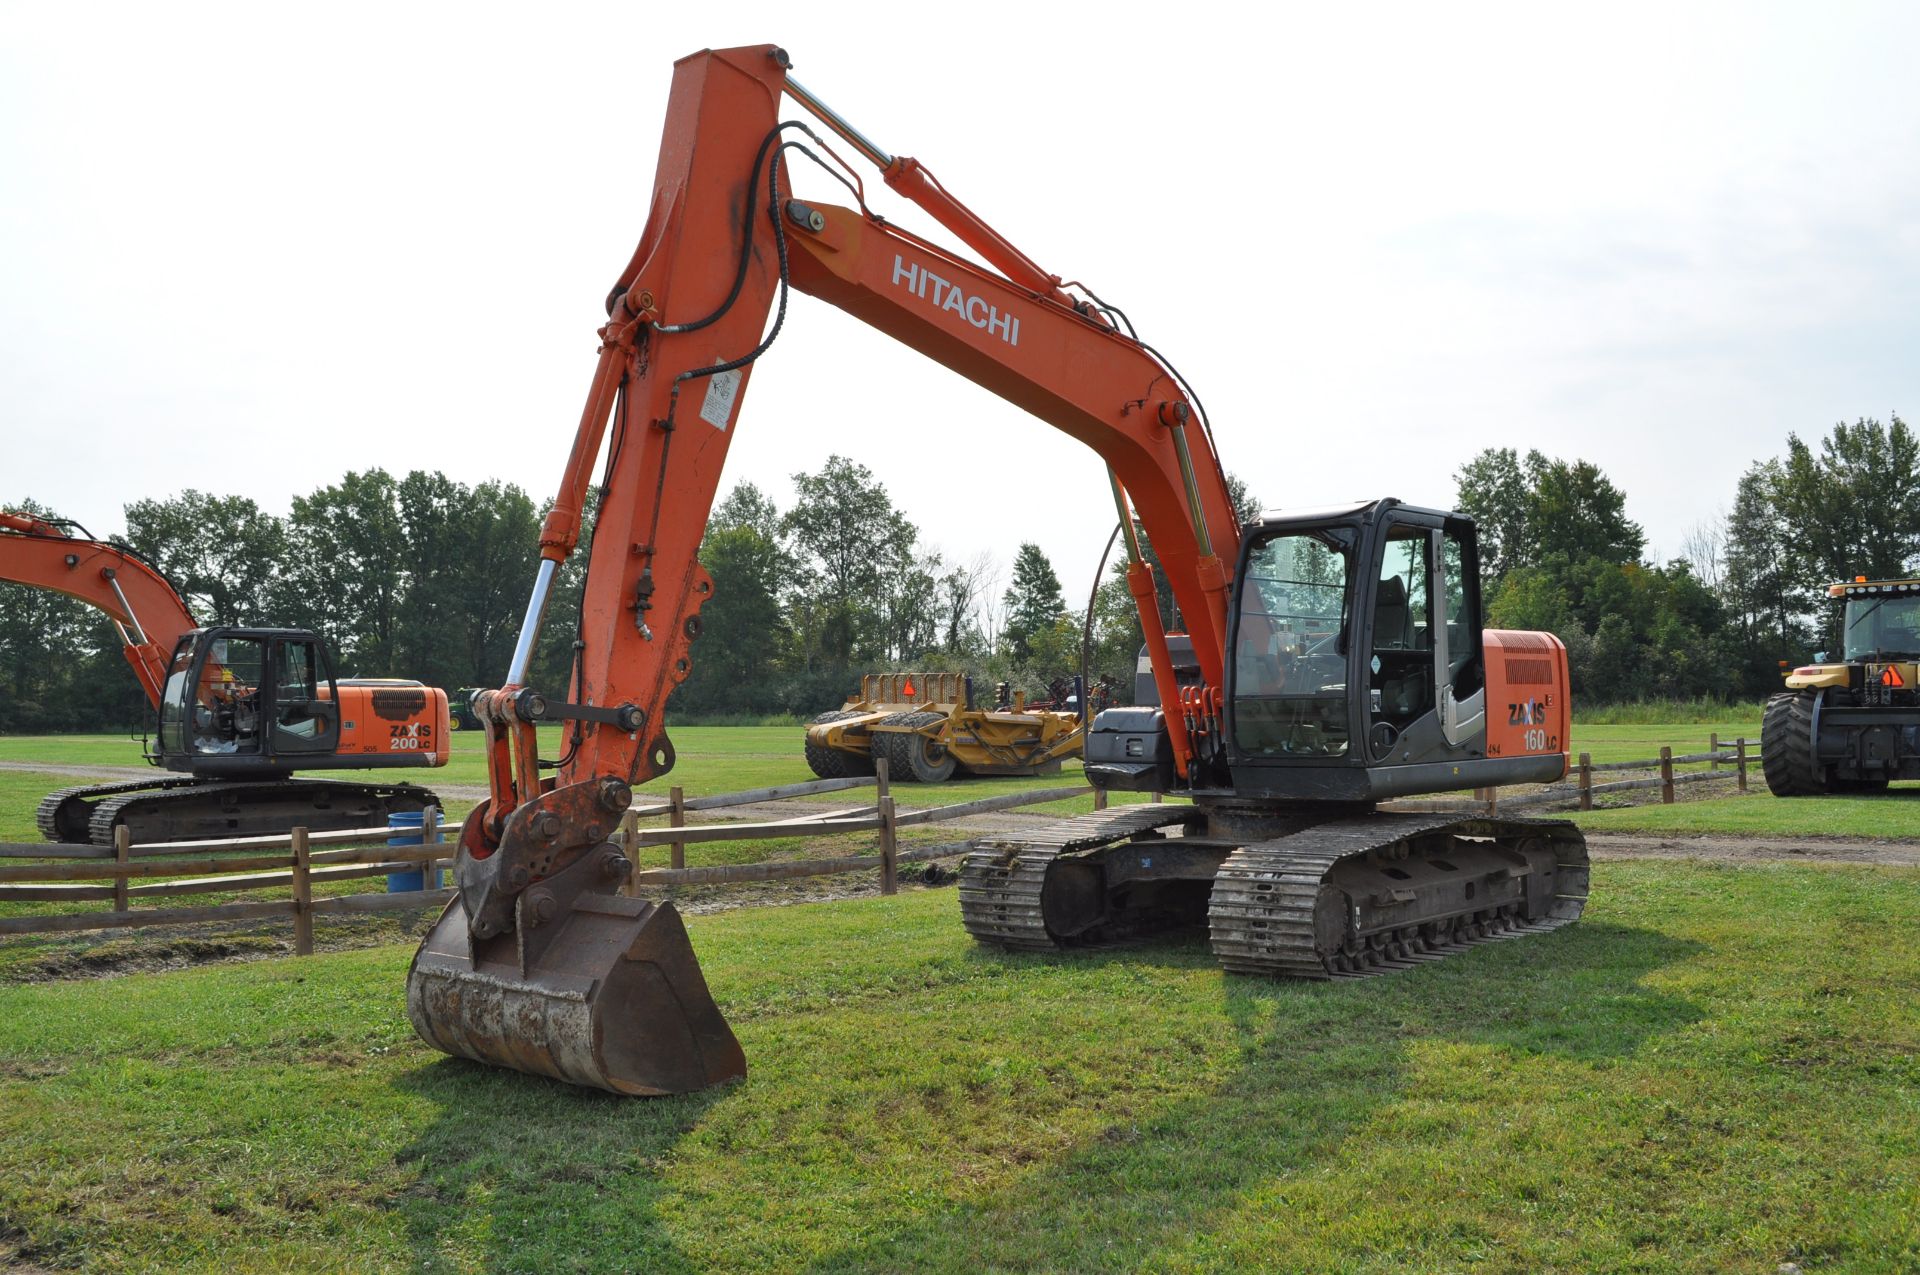 Hitachi ZX 160 LC-3 excavator, 28” steel pads, C/H/A, 5' smooth bucket, hyd coupler, aux boom hyd - Image 2 of 34